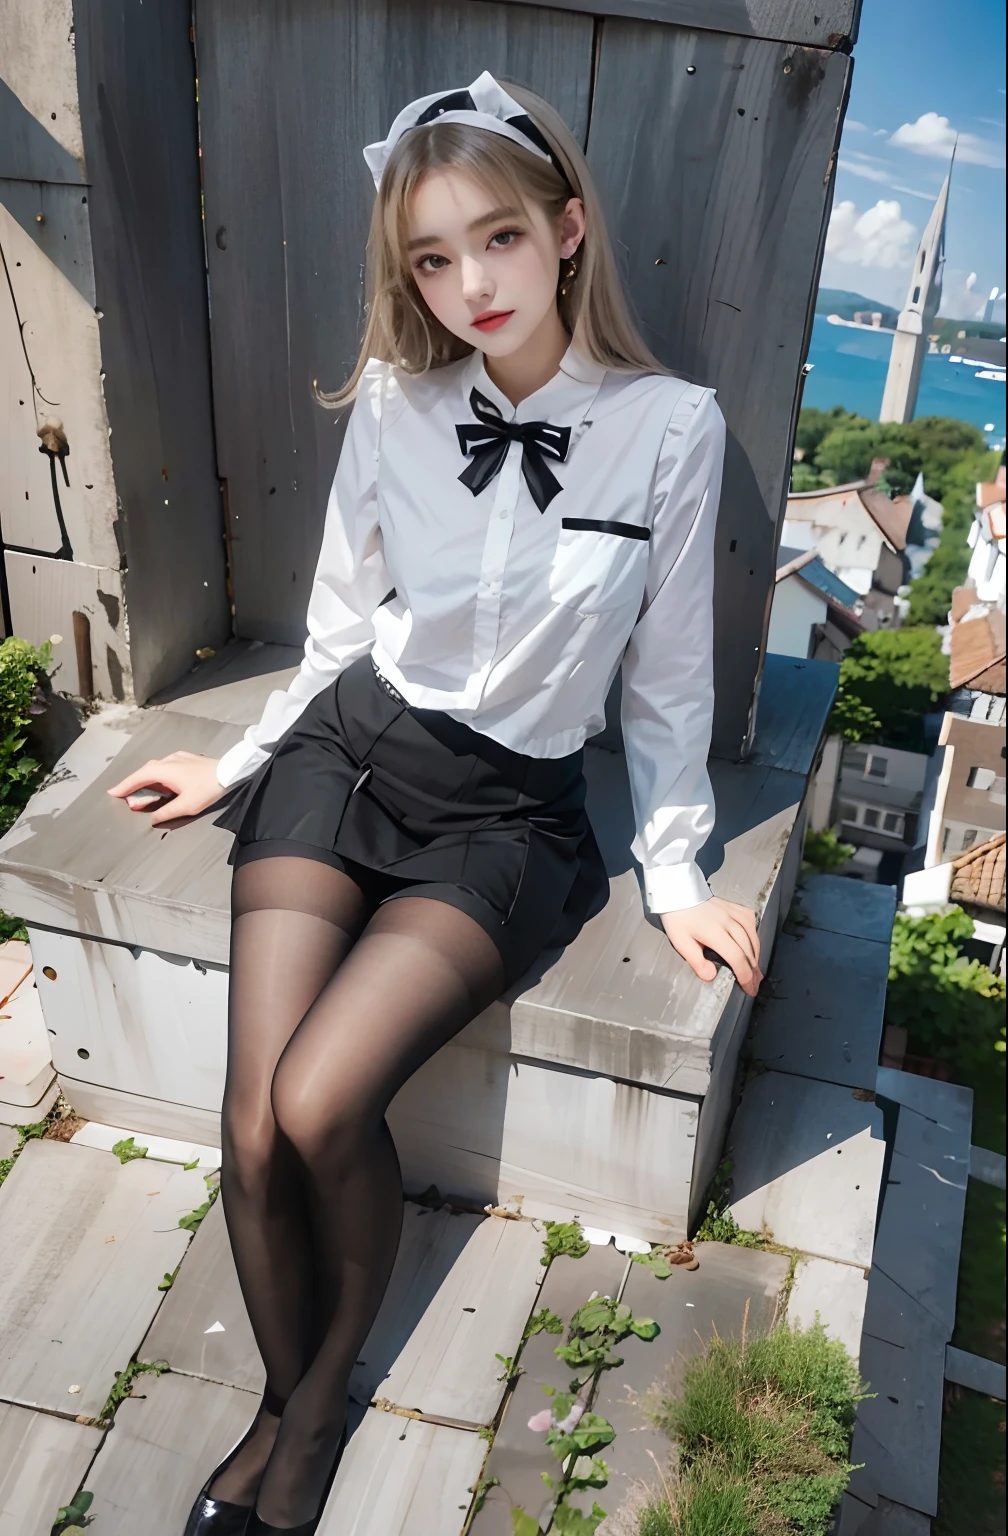 there is a woman in a white dress and black stockings, Maid outfit, Maid dress, cosplay of a catboy! maid! dress, smooth white tight clothes suit, wearing maid uniform, maid costume, ( ivory black ), white and black, pale snow-white skin, gorgeous maid, sakimichan, anime girl in a maid costume, shikamimi